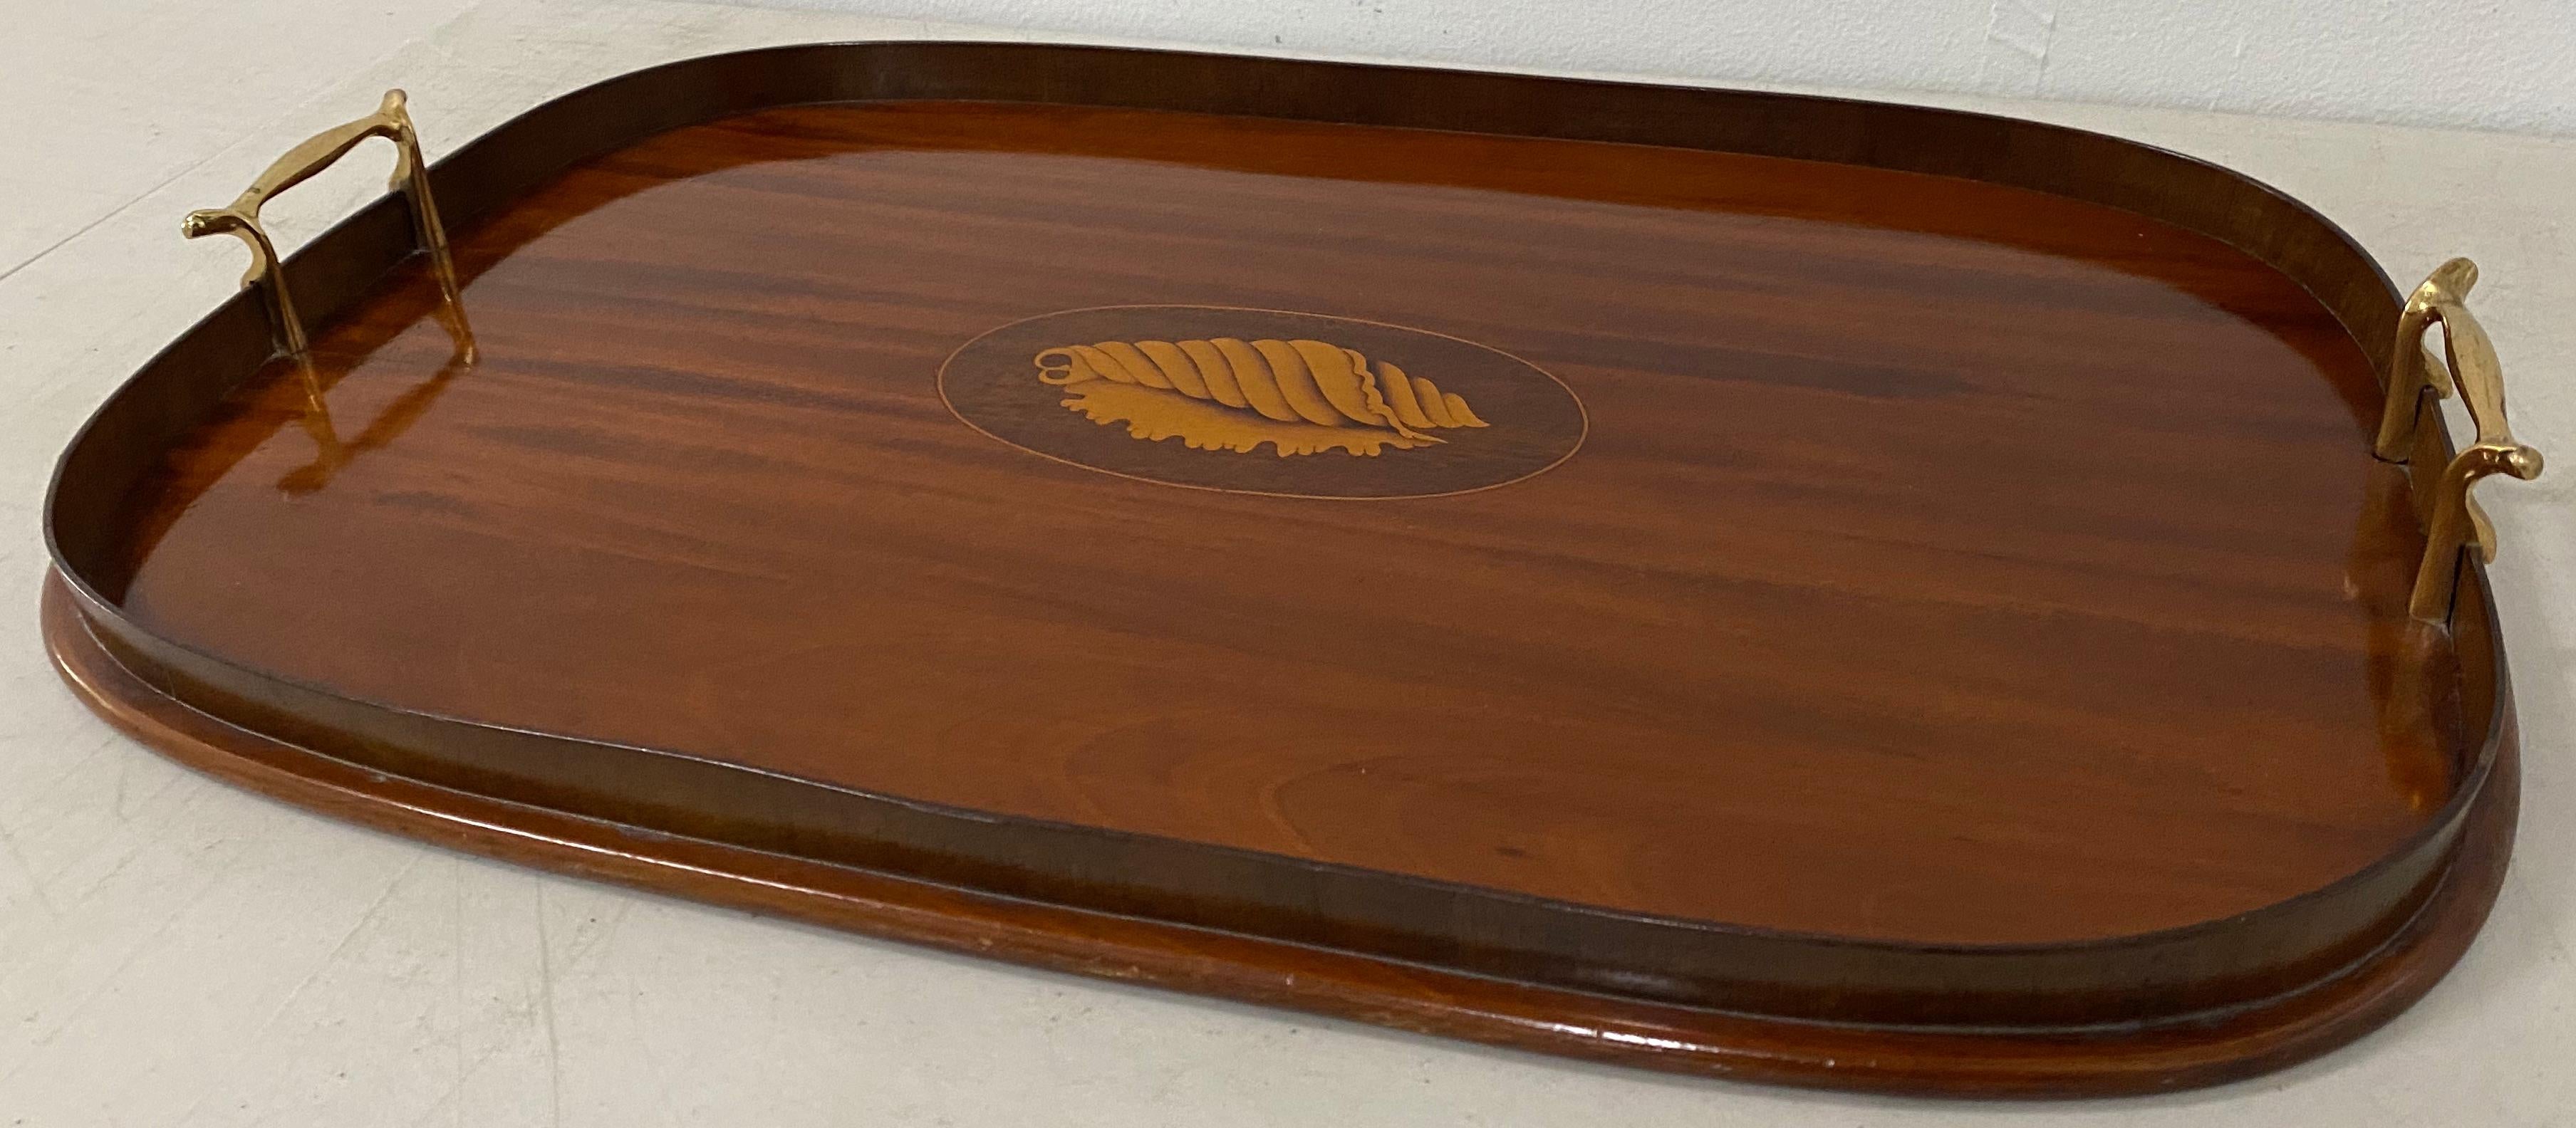 Early 20th century mahogany serving / bar tray with shell inlay

Gorgeous handcrafted serving tray. Made with old growth mahogany with maple inlay.

The serving tray is in excellent condition, but could use some new felt strips on the bottom